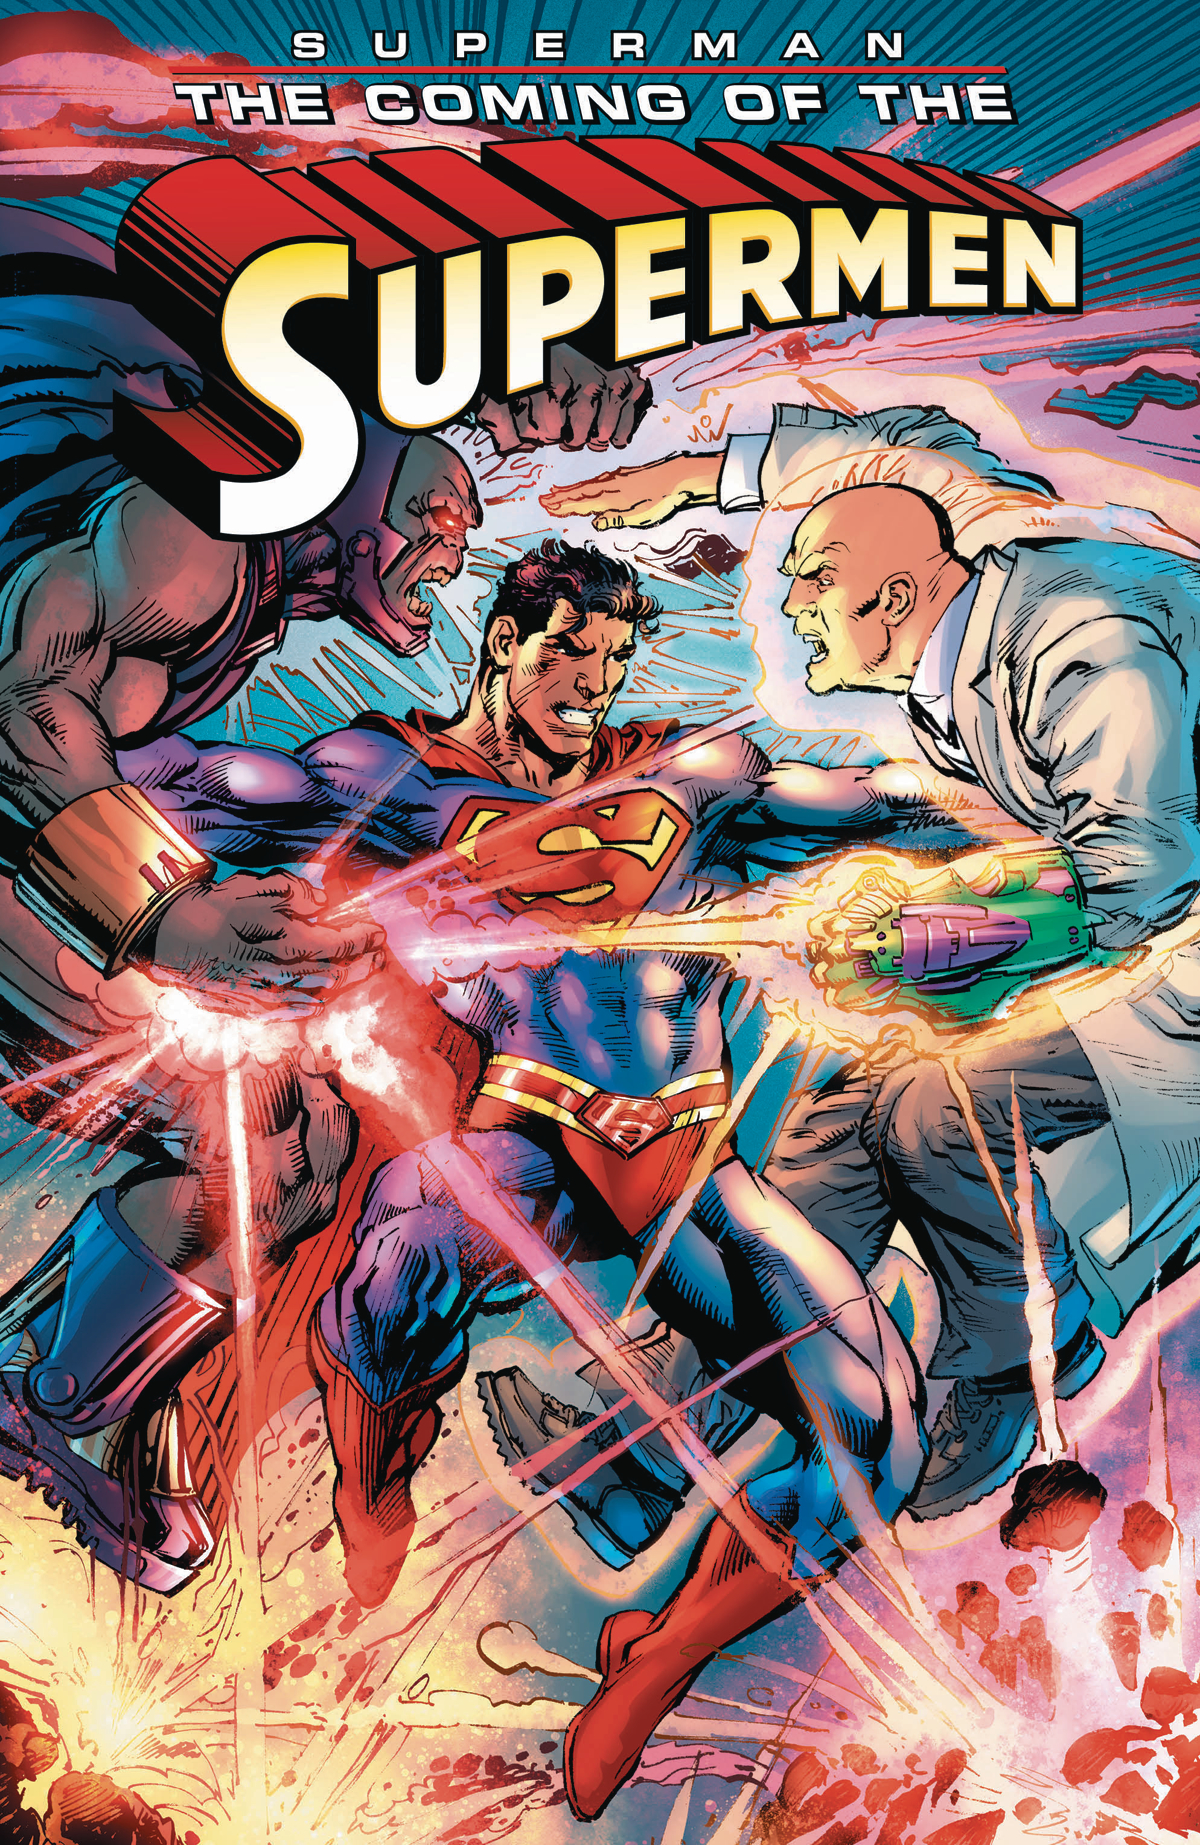 SUPERMAN THE COMING OF THE SUPERMEN #5 (OF 6)